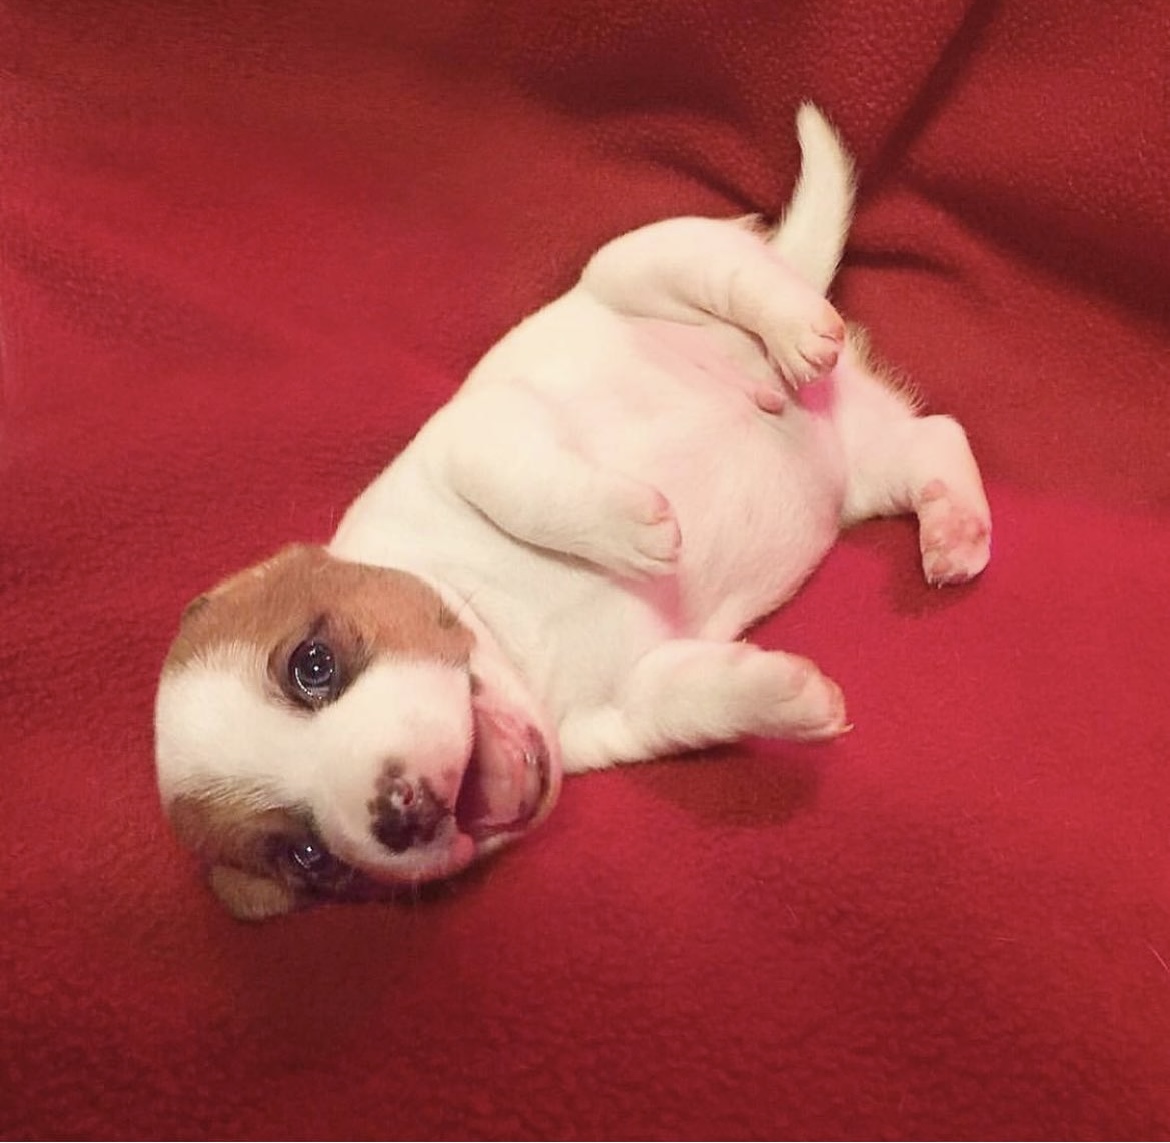 HAPPY SATURDAY HERE IS THE CUTEST LIL BIG SMILE EVER.

#puppies #doglovers #jackrussellnation #9gag #barked #animalsdoingthings #jrt #jackrusselldog #astro #dogs #dogsofinstagram #dog #dogstagram #jackrussellofinstagram #cute #cuteness #cutenessoverload #doggo #doglovers #doglove